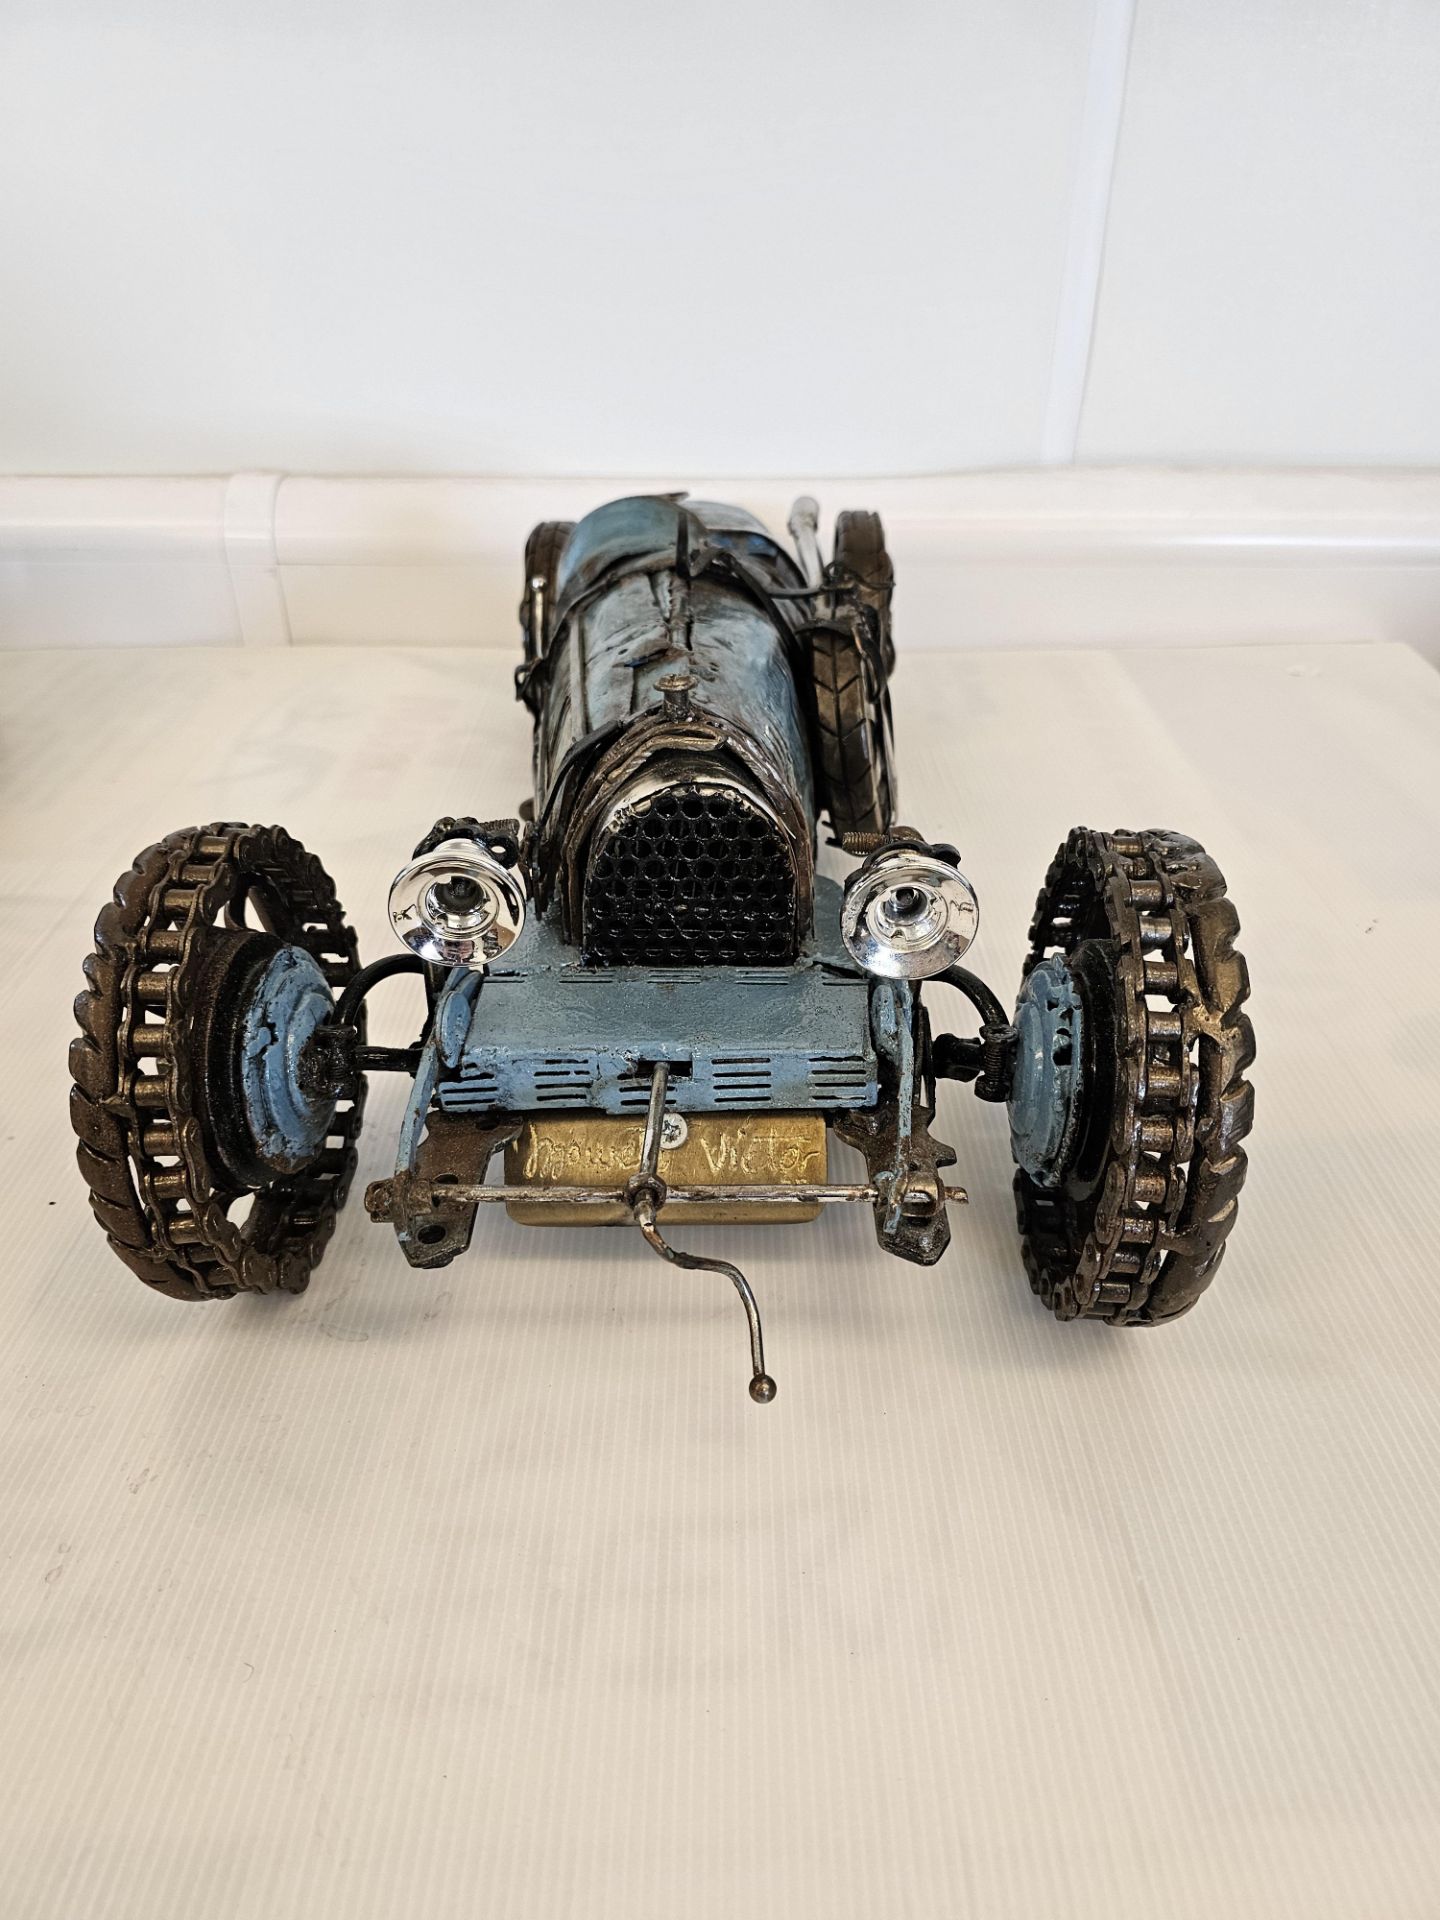 1923 Mercedes Benz 10/30 HP - One-off artistic model made from Iron, steel and glass, These rare and - Image 4 of 7